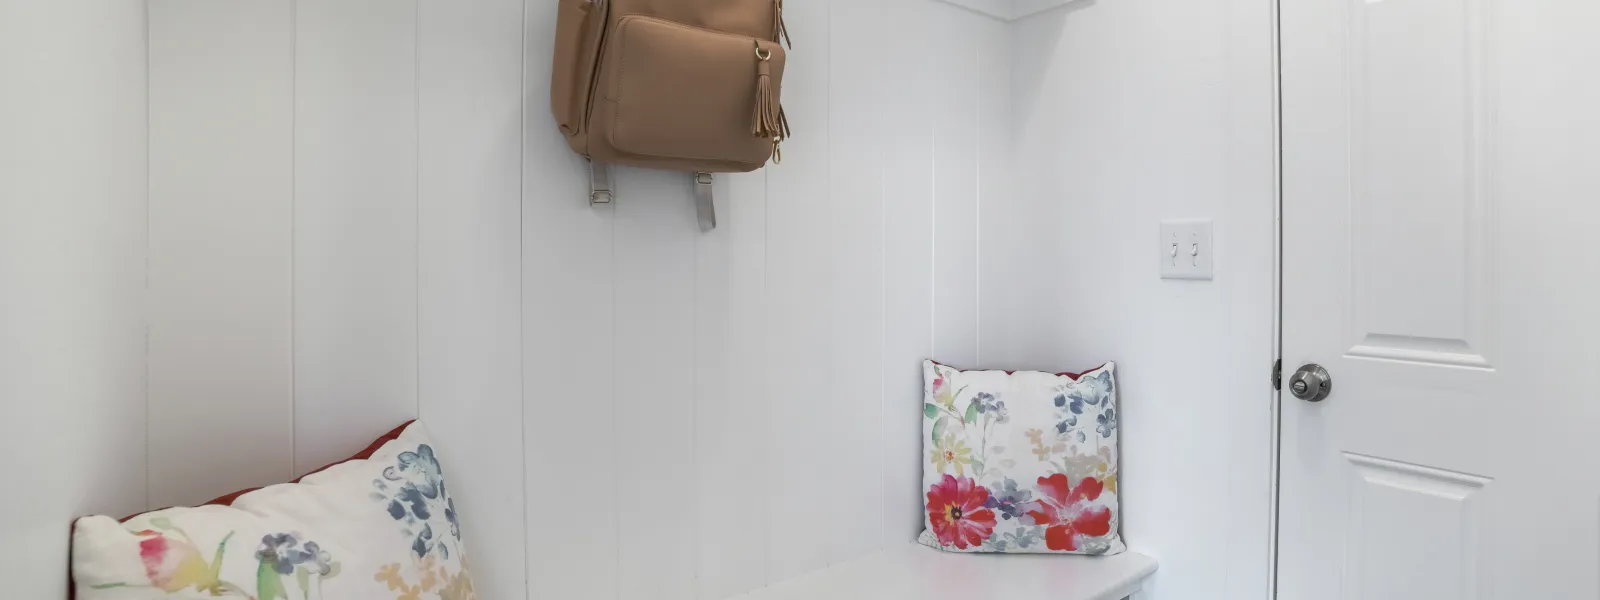 a purse on a wall in a mud room